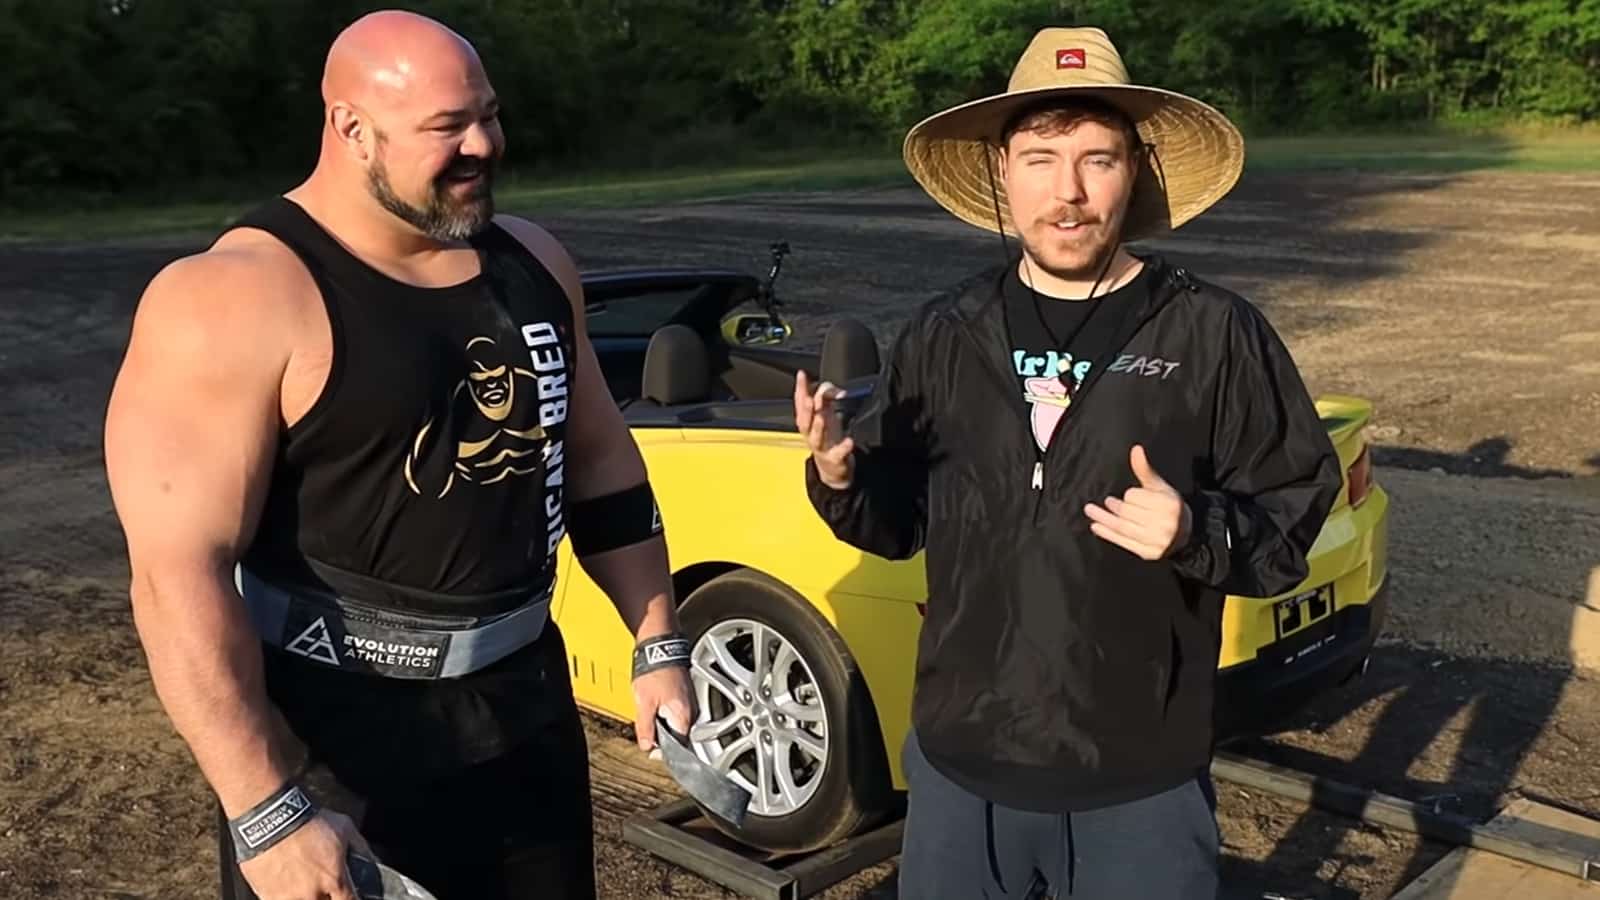 MrBeast gives away $25,000 car to strongman who deadlifts it with YouTuber inside